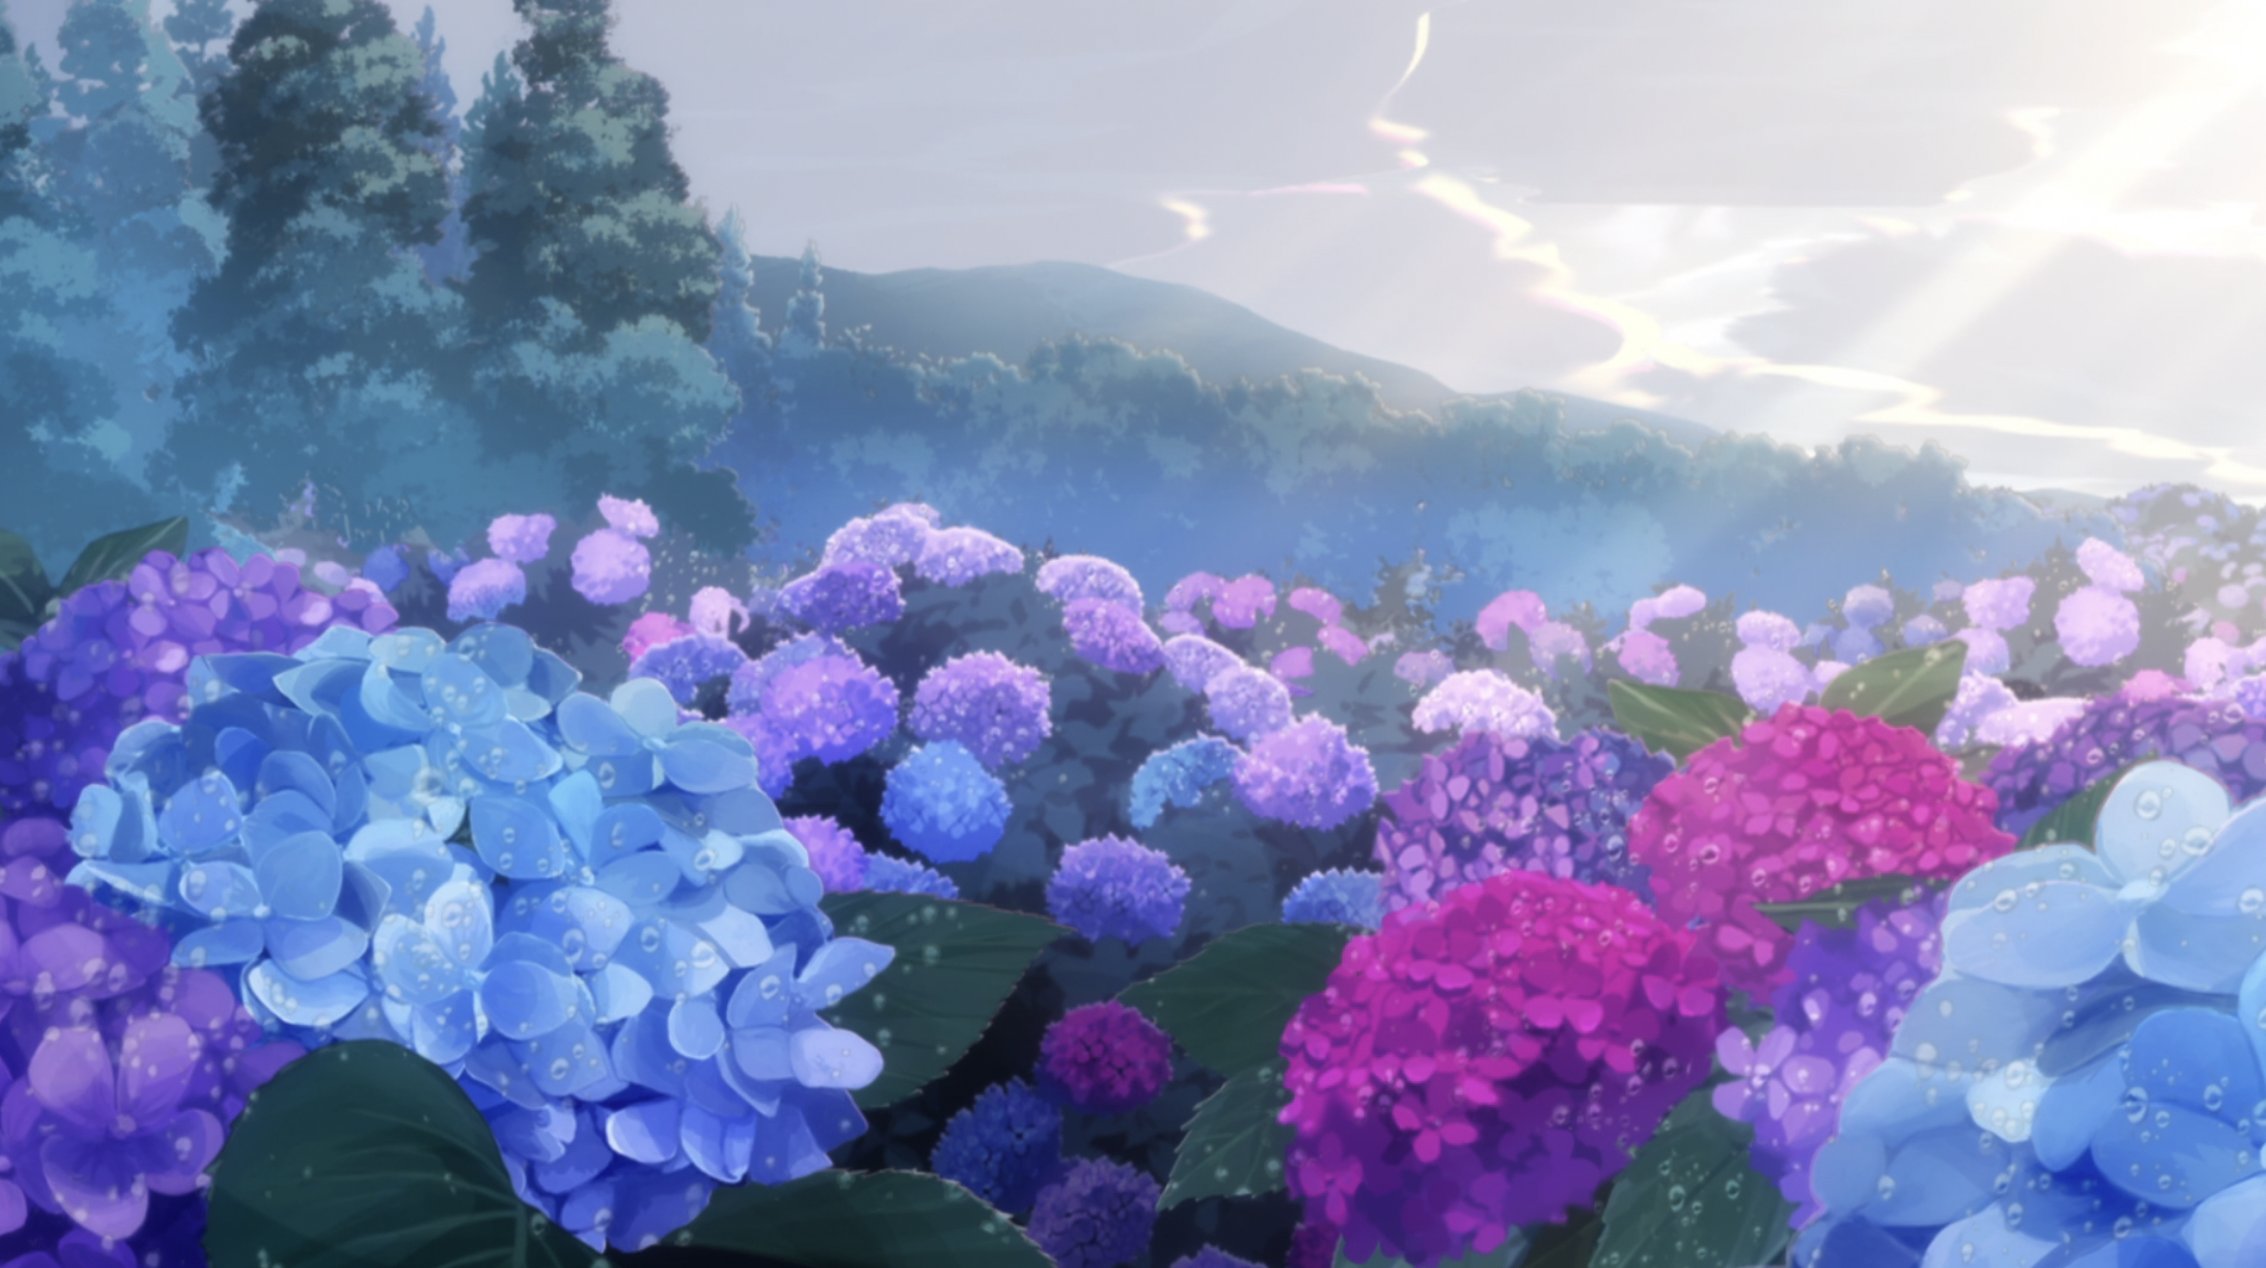 Twitter-এ Romania💜🌈🏀🍷🤍🖤 Black: "#BuddyDaddies Episode 7 SPOILERS Kazuki's afraid of "change" and "being fulfilled by something else?" His sister-in-law encouraging him to live his own life? The flowers surrounding them LITERALLY being